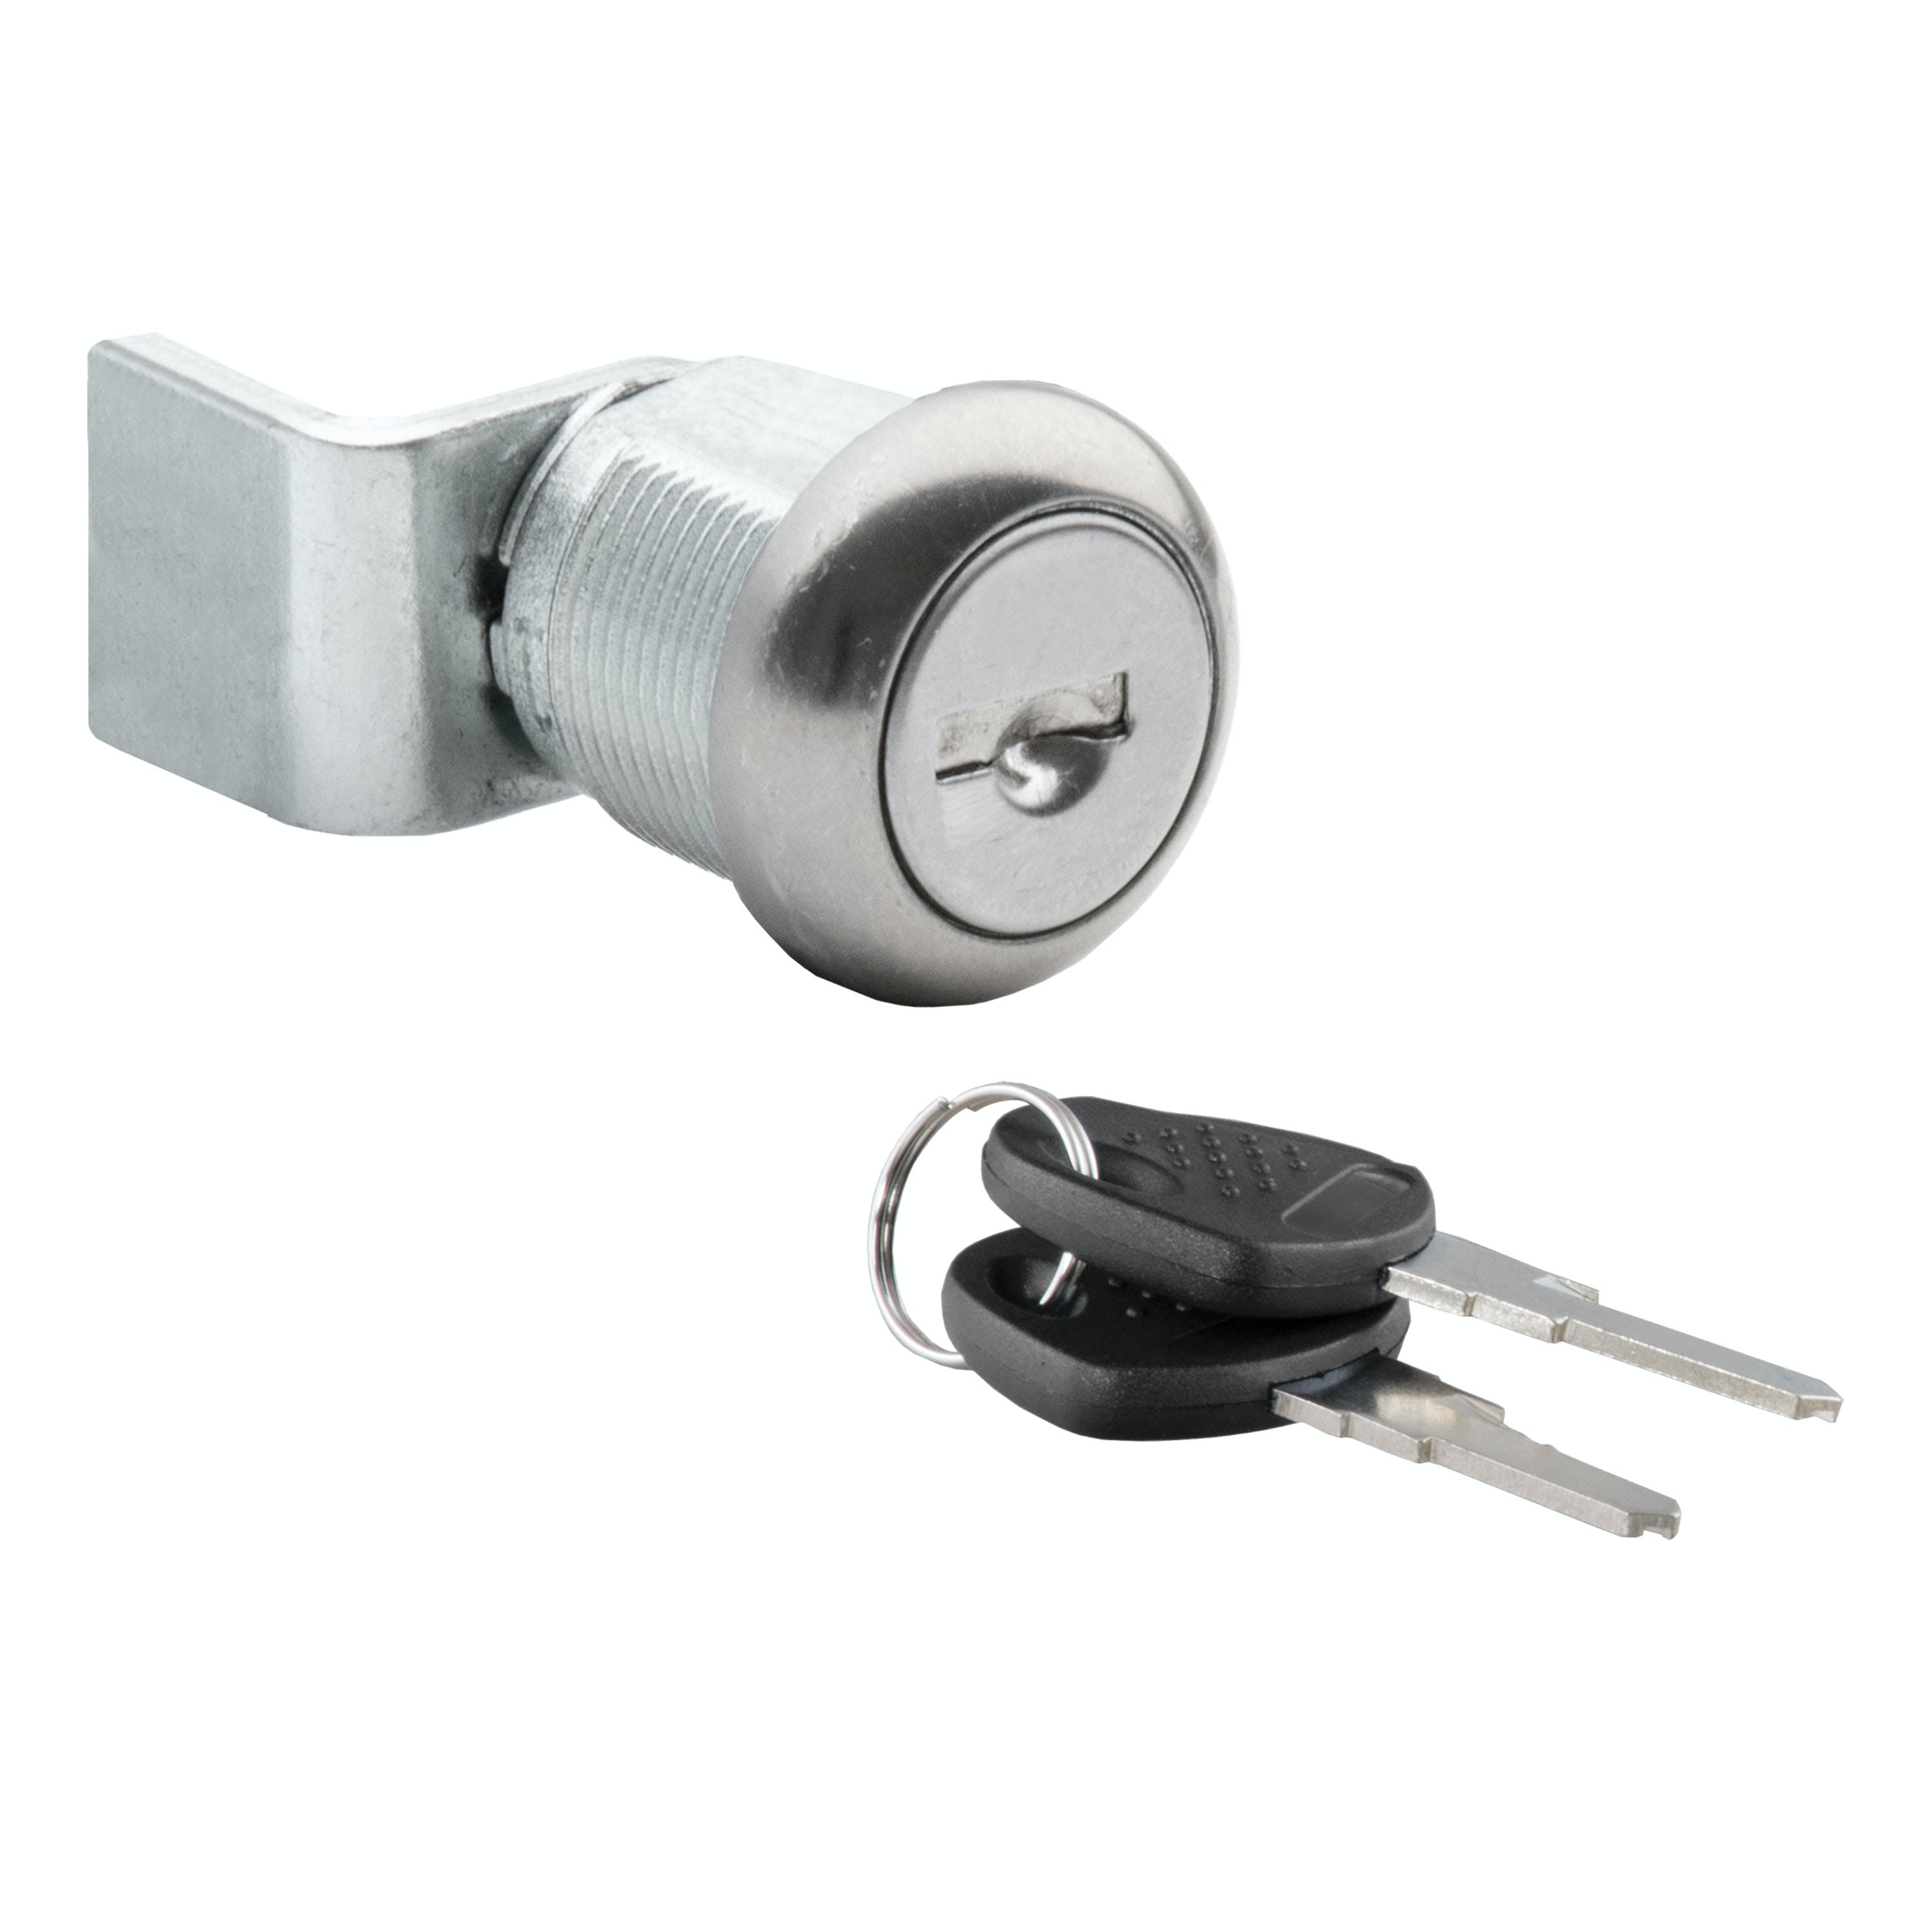 UWS 003-RYTHCY-009 Replacement T-Handle Lock Cylinder and Keys